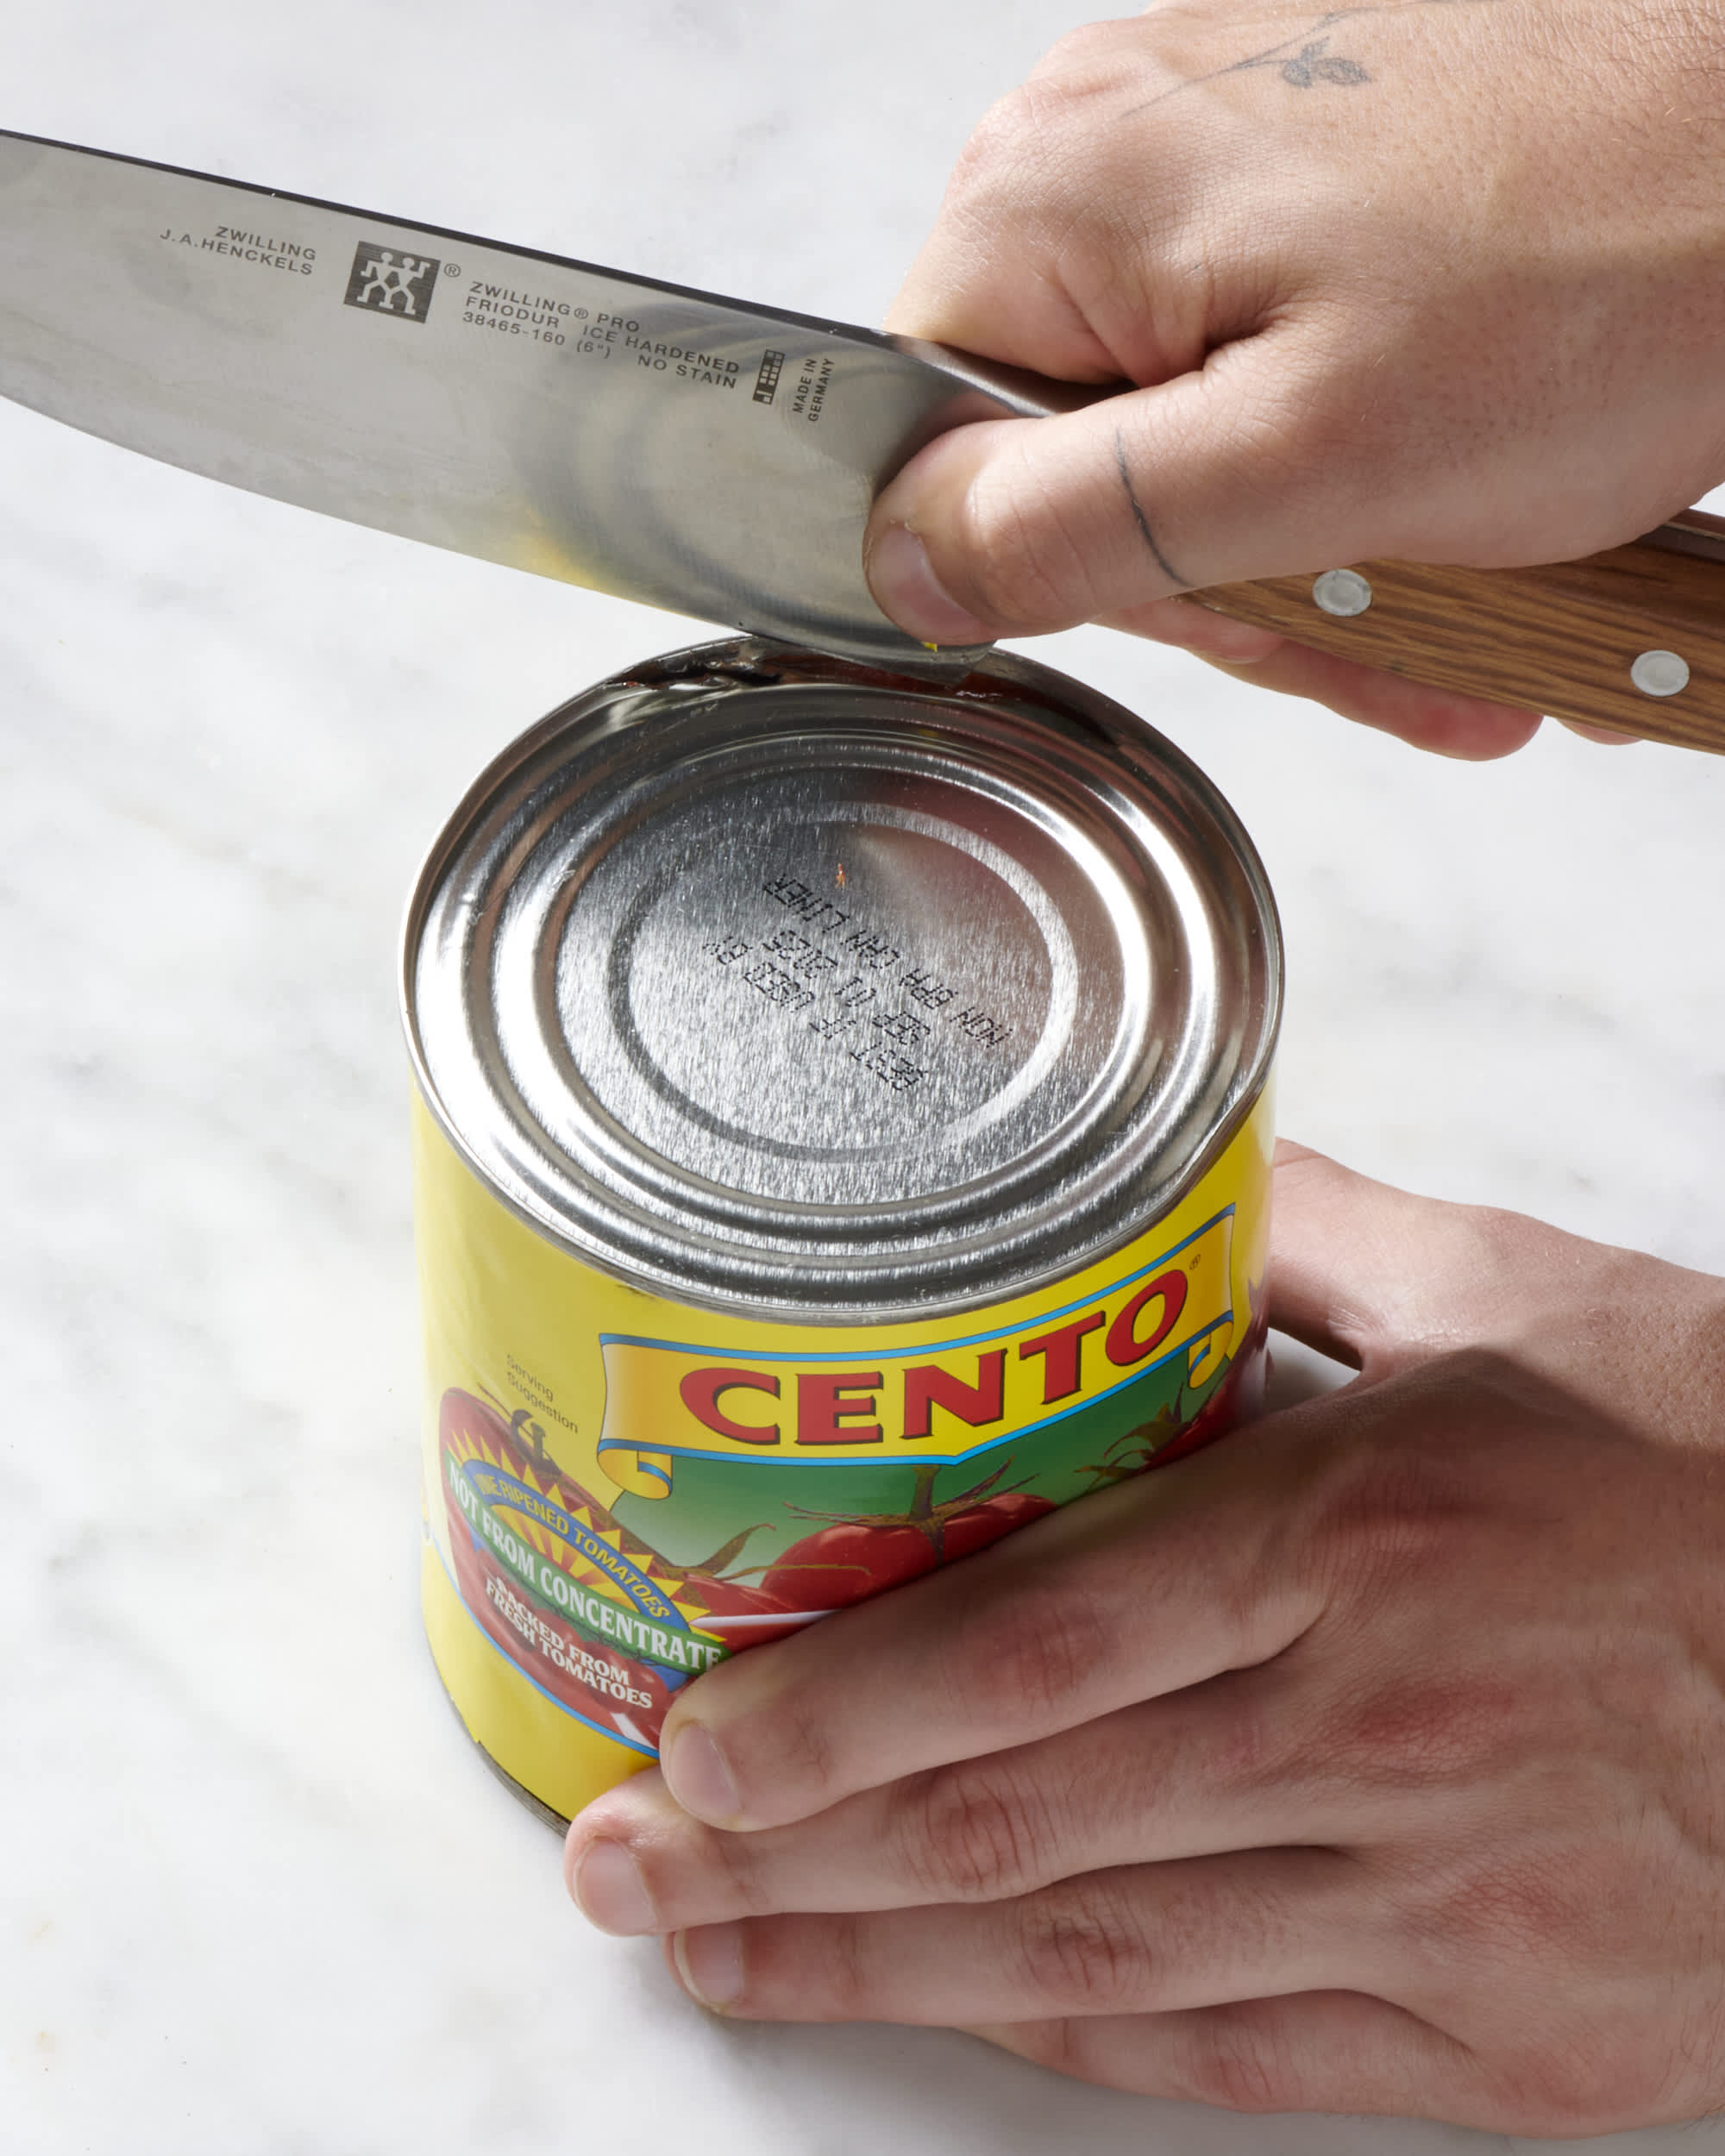 https://cdn.apartmenttherapy.info/image/upload/v1694456198/k/Photo/Series/2023-09-how-to-open-a-can-without-a-can-opener/how-to-open-a-can-without-a-can-opener-004.jpg